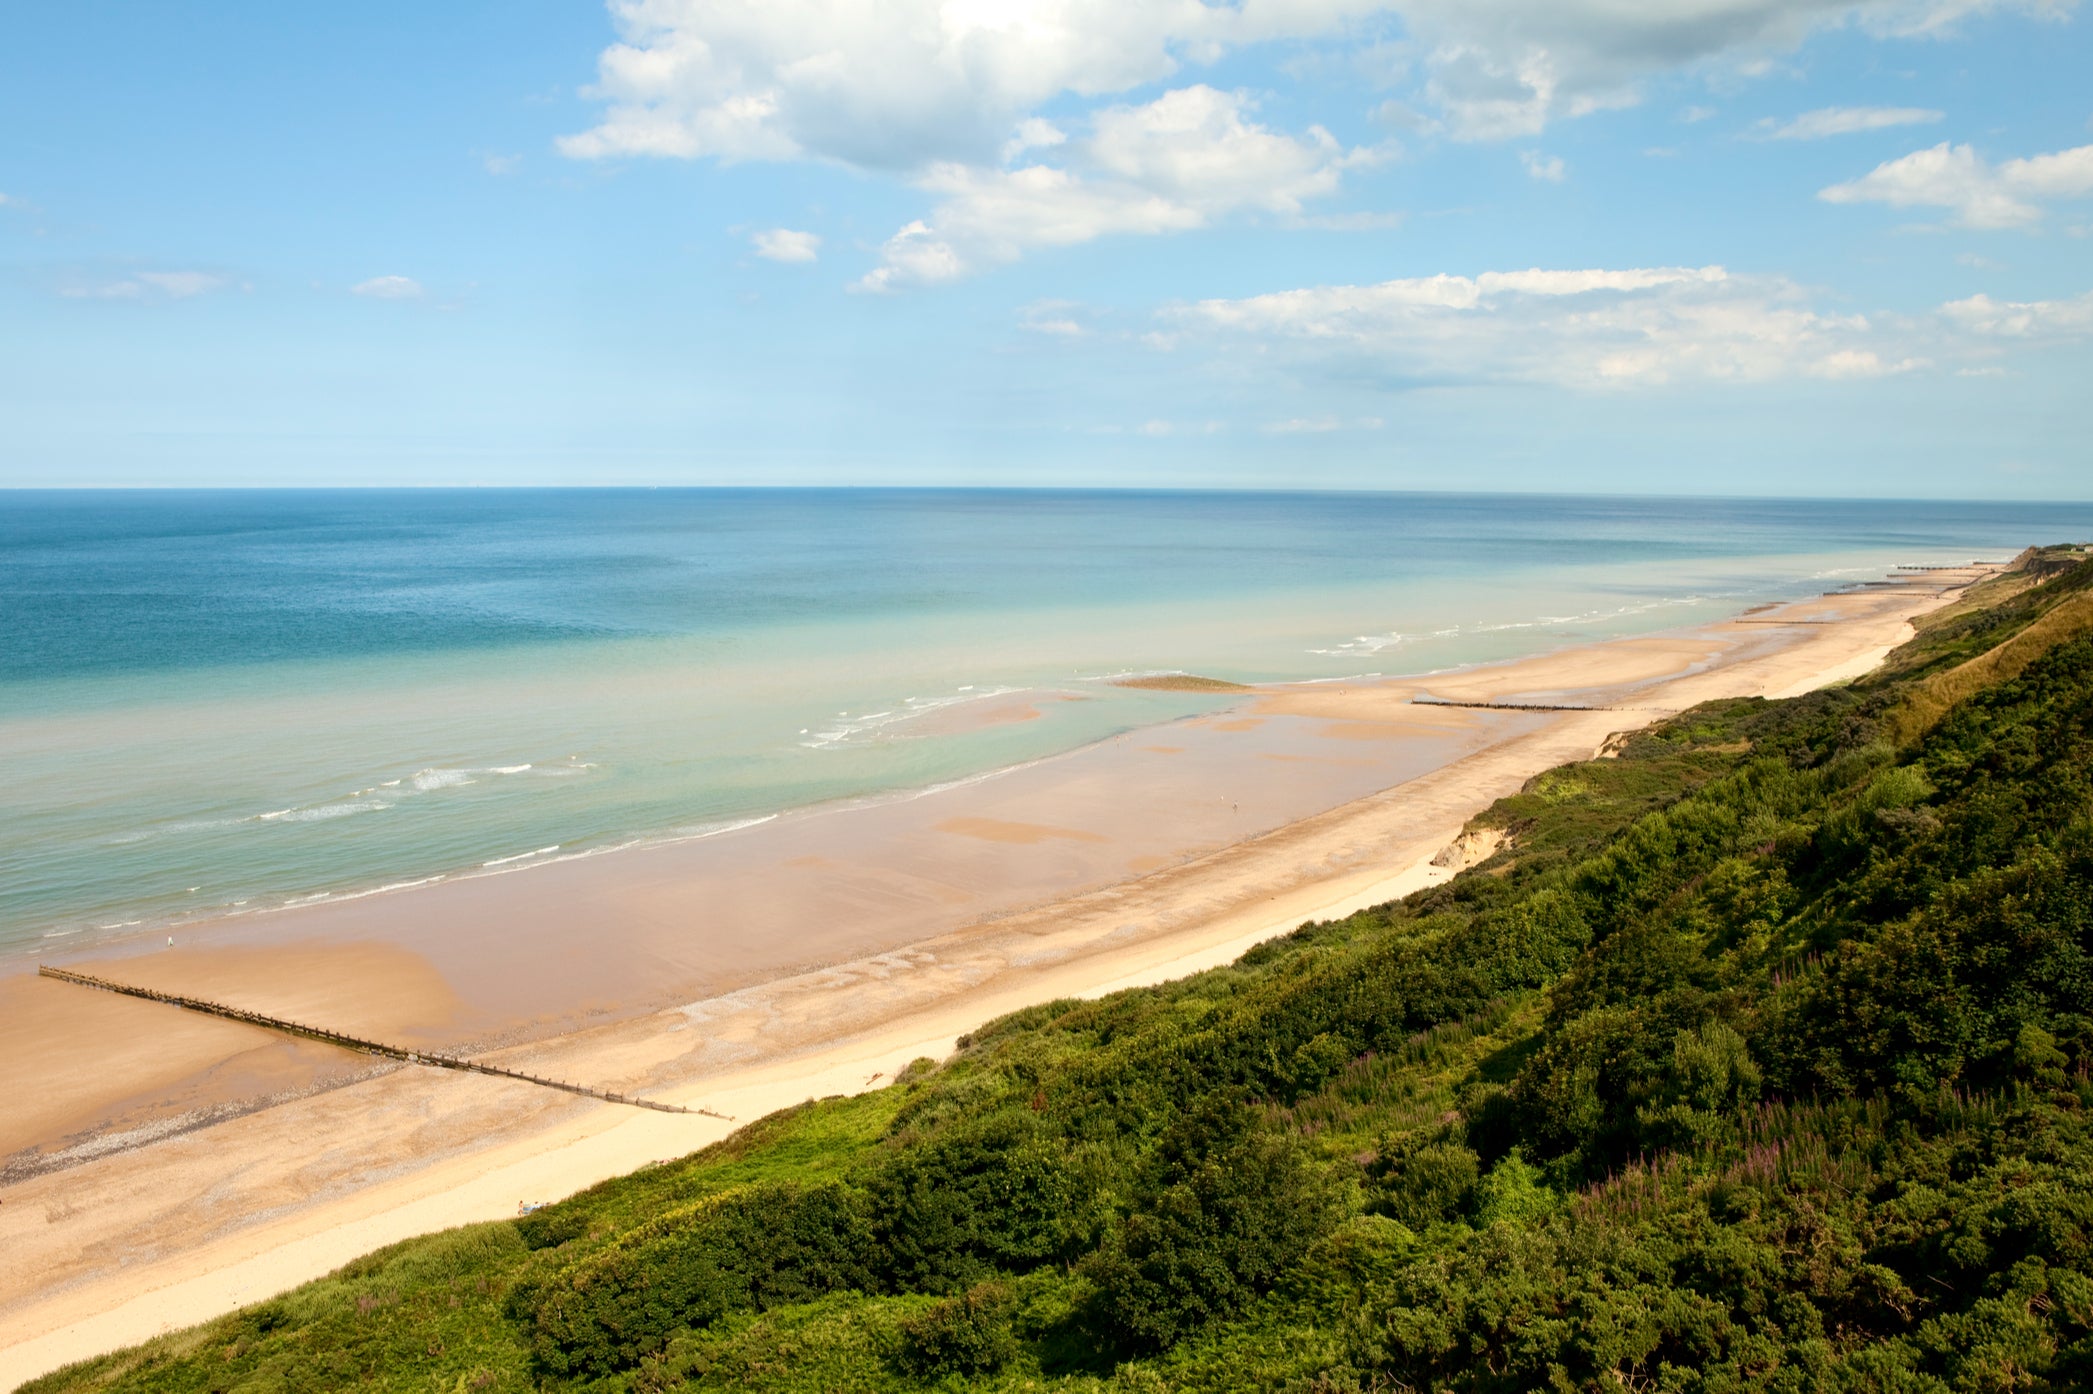 The spectacular Norfolk coast remains one of the county’s major lures